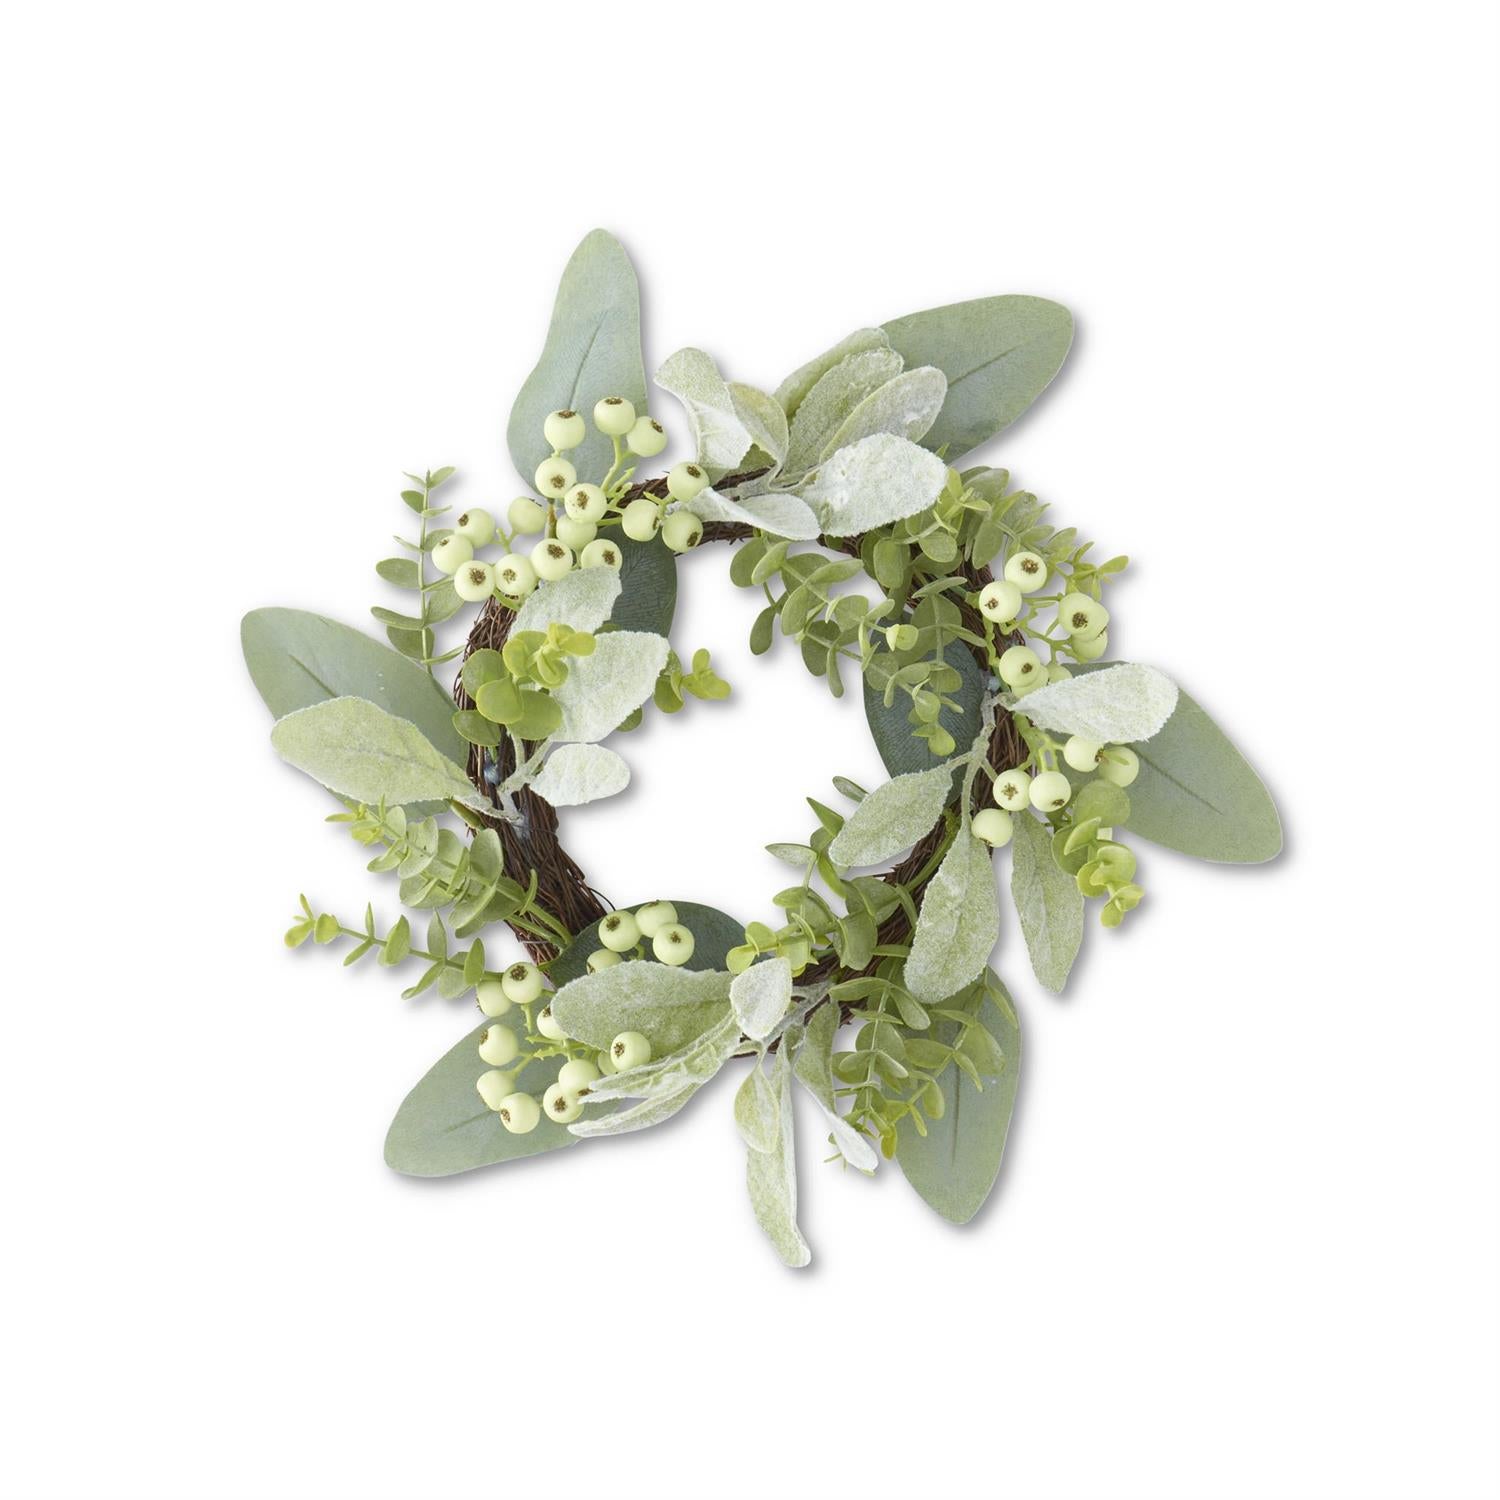 Mixed Green Foliage with Berries Mini Wreath or Candle Ring, 13 inch